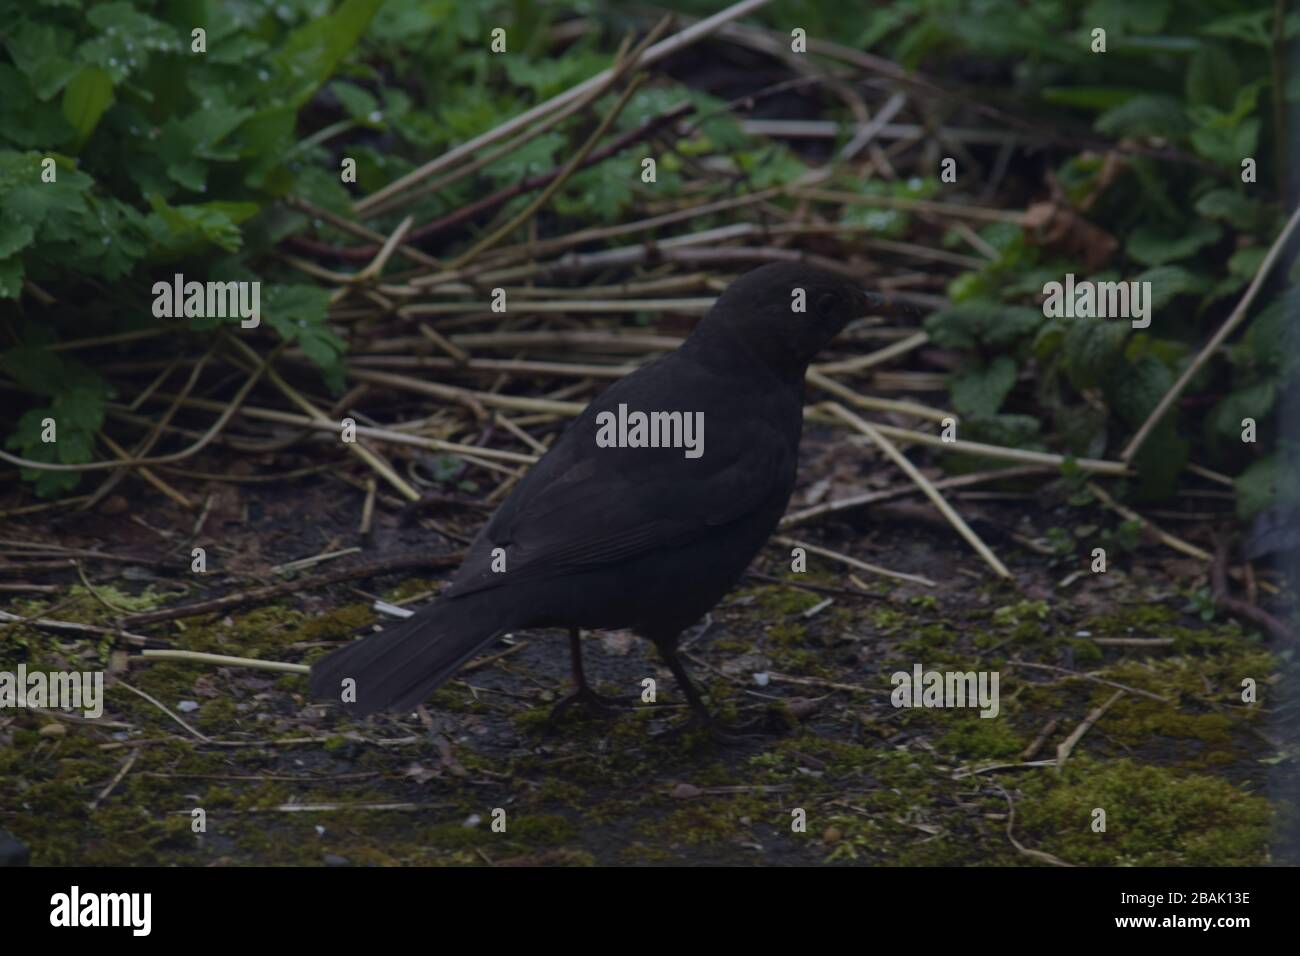 Image of a blackbird foraging for food Stock Photo